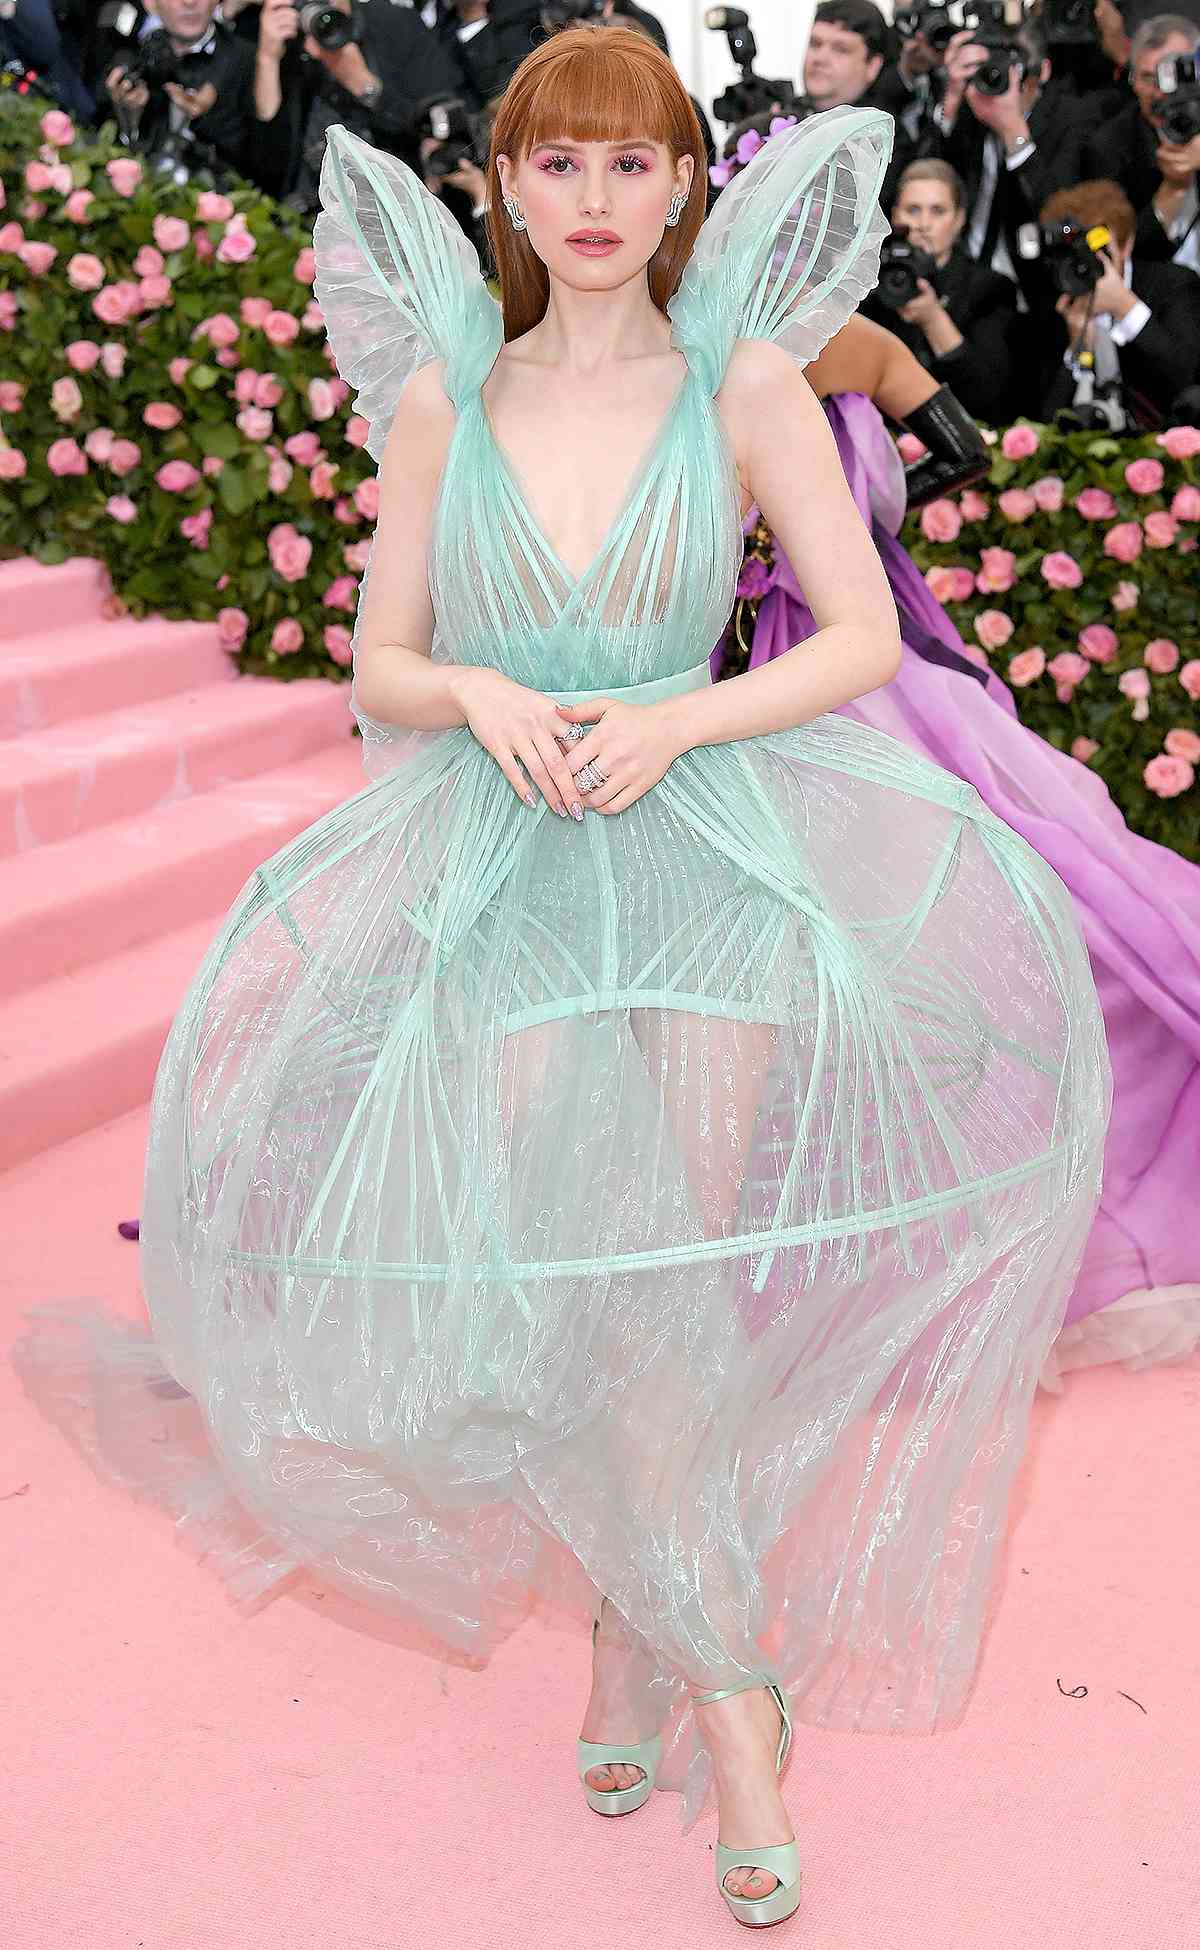 NEW YORK, NEW YORK - MAY 06: Madelaine Petsch attends The 2019 Met Gala Celebrating Camp: Notes on Fashion at Metropolitan Museum of Art on May 06, 2019 in New York City. (Photo by Neilson Barnard/Getty Images)